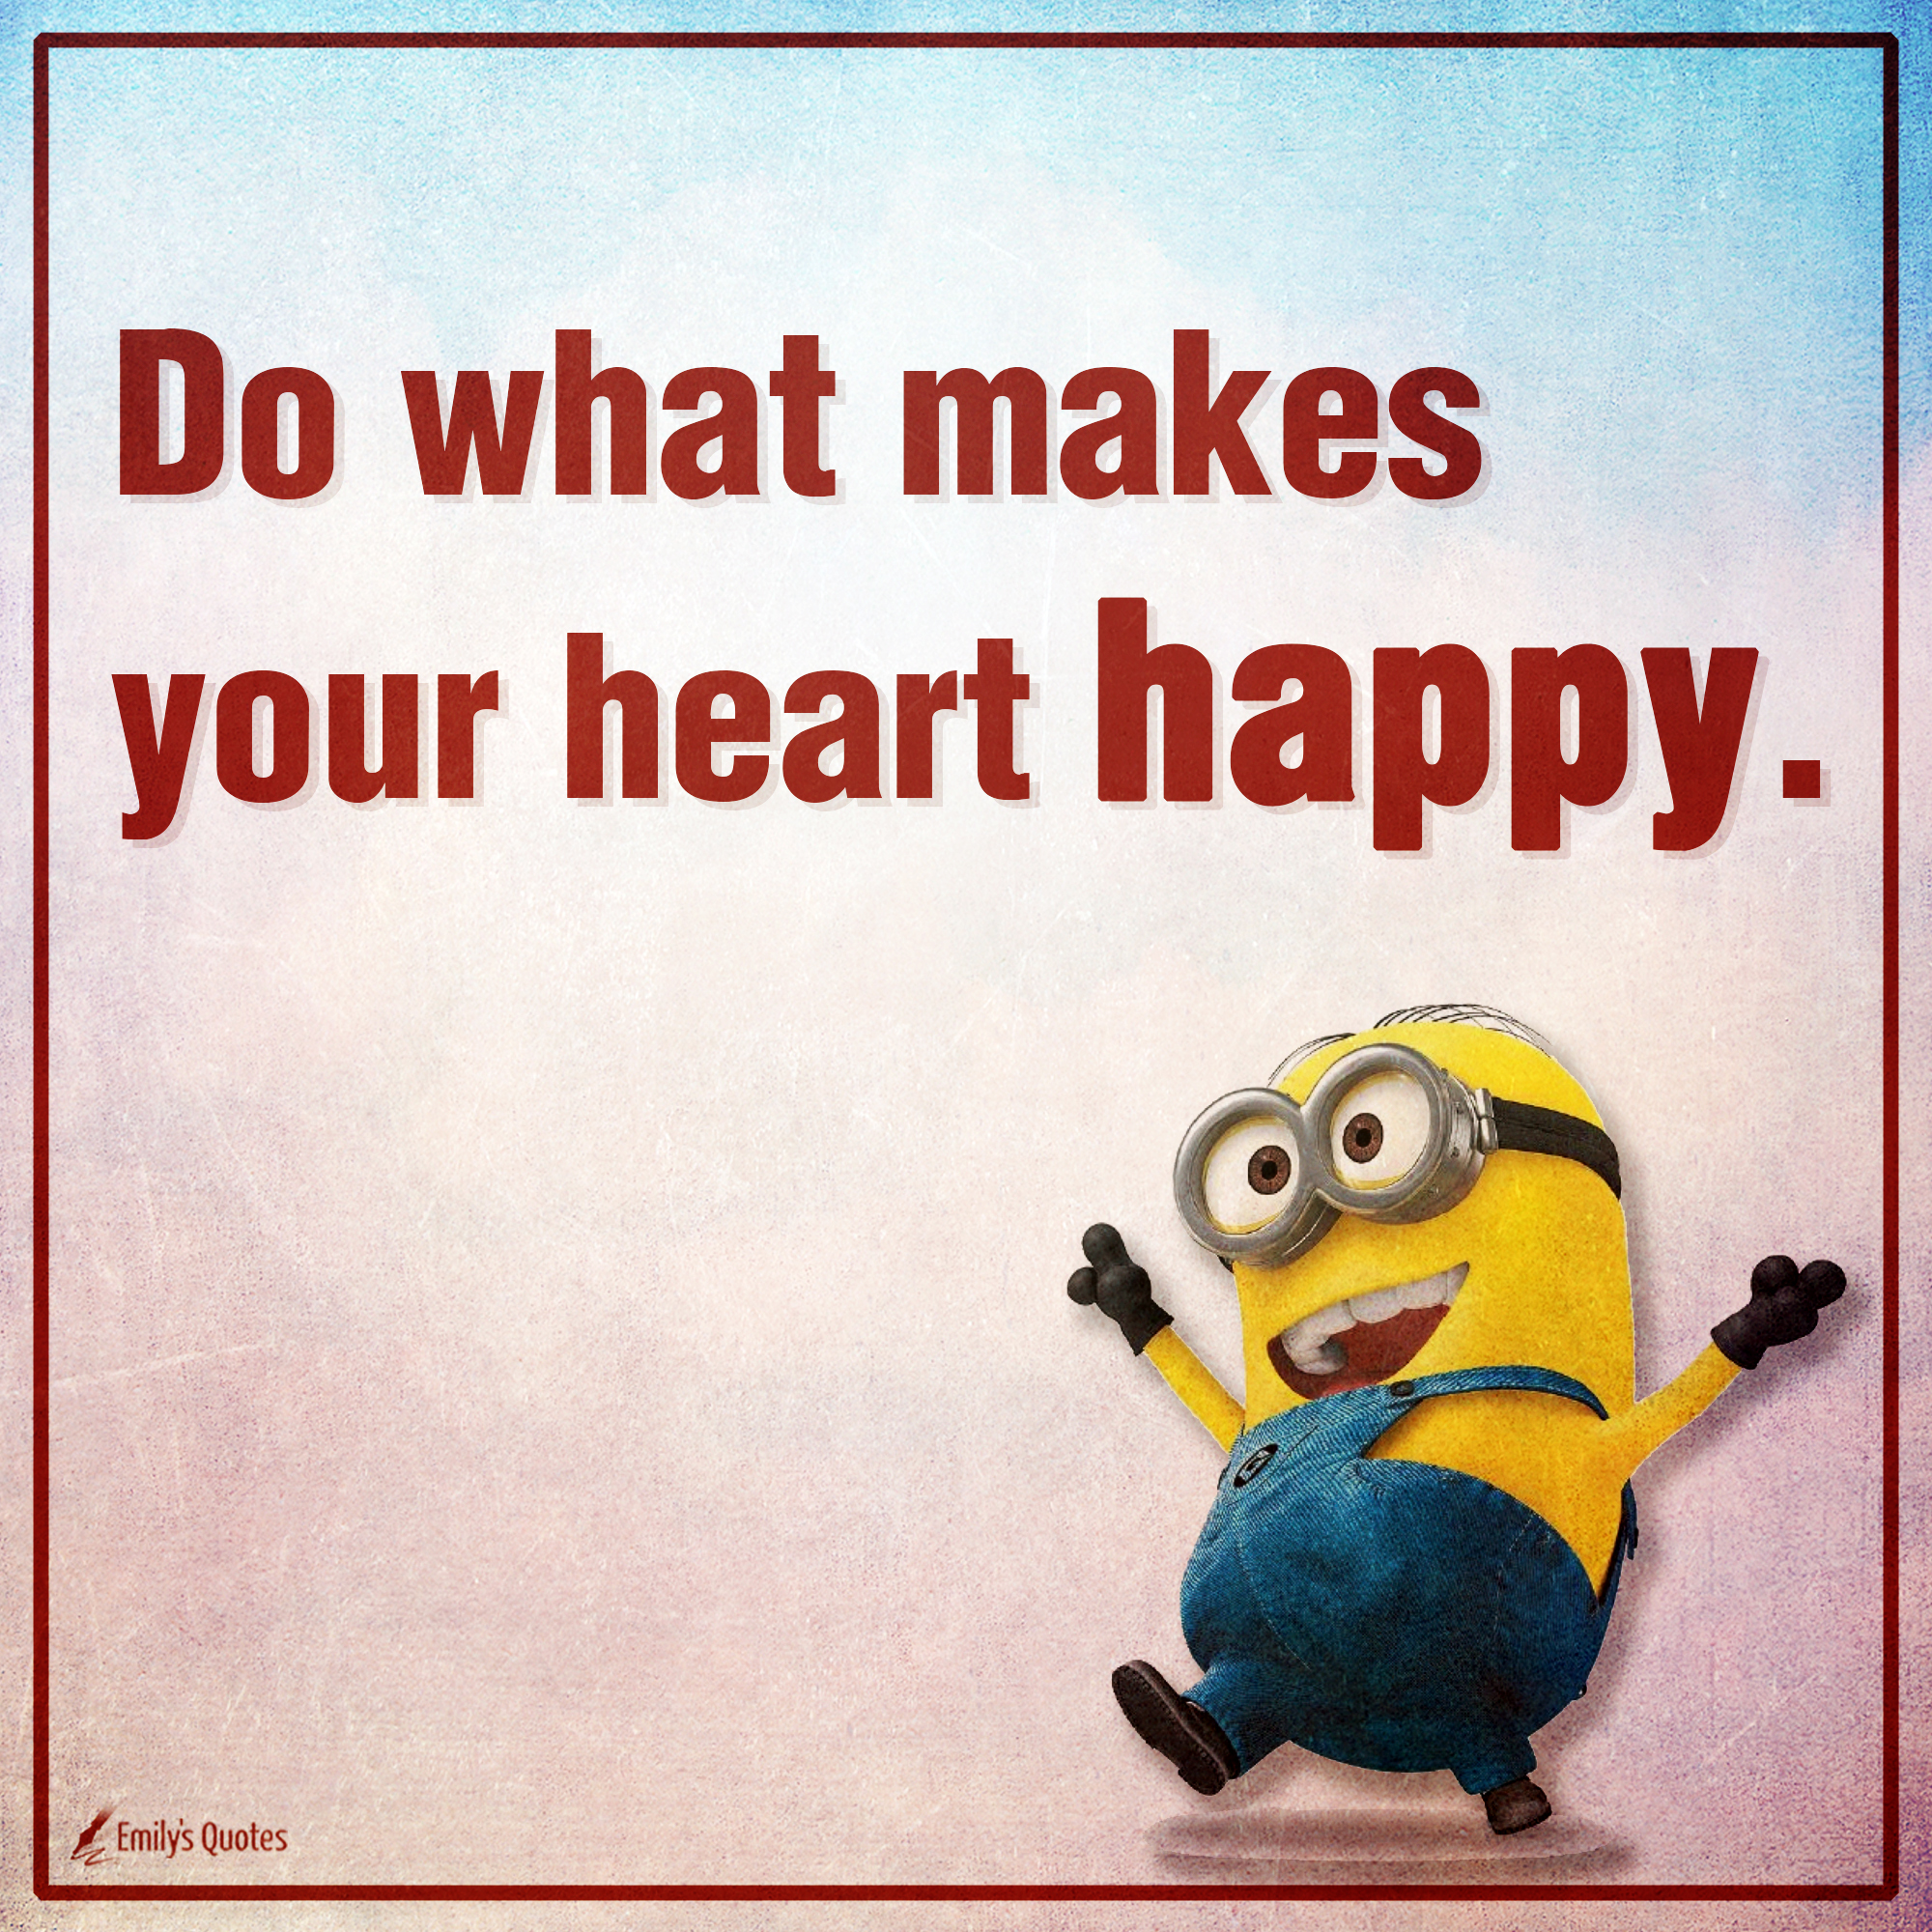 Do what makes your heart happy